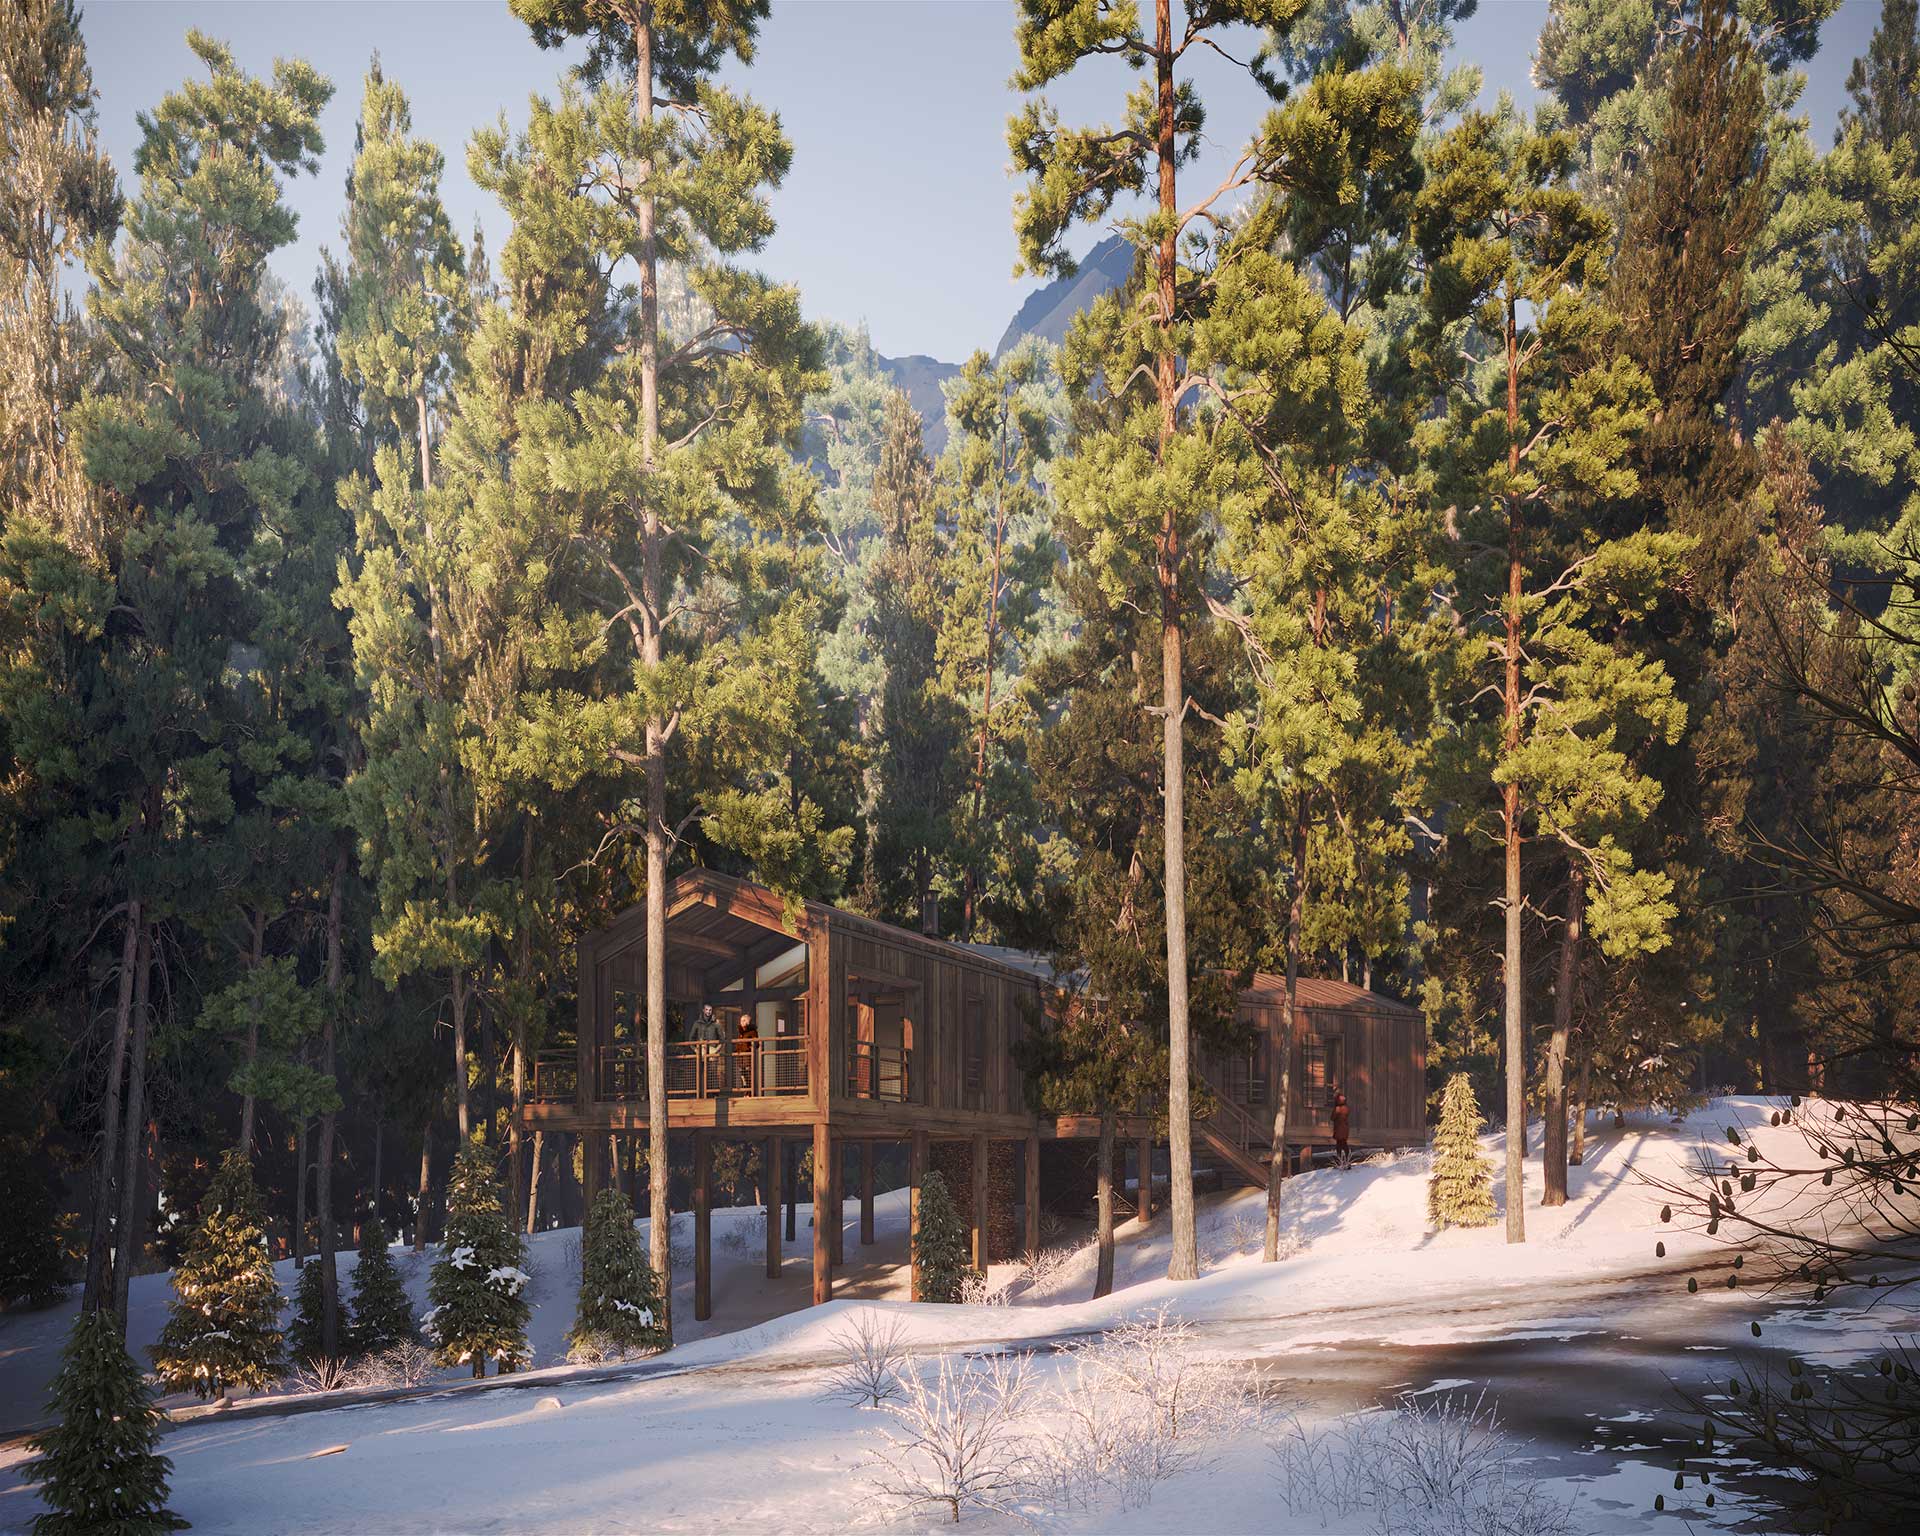 3D visualization of a cabin insertion in a forest landscape